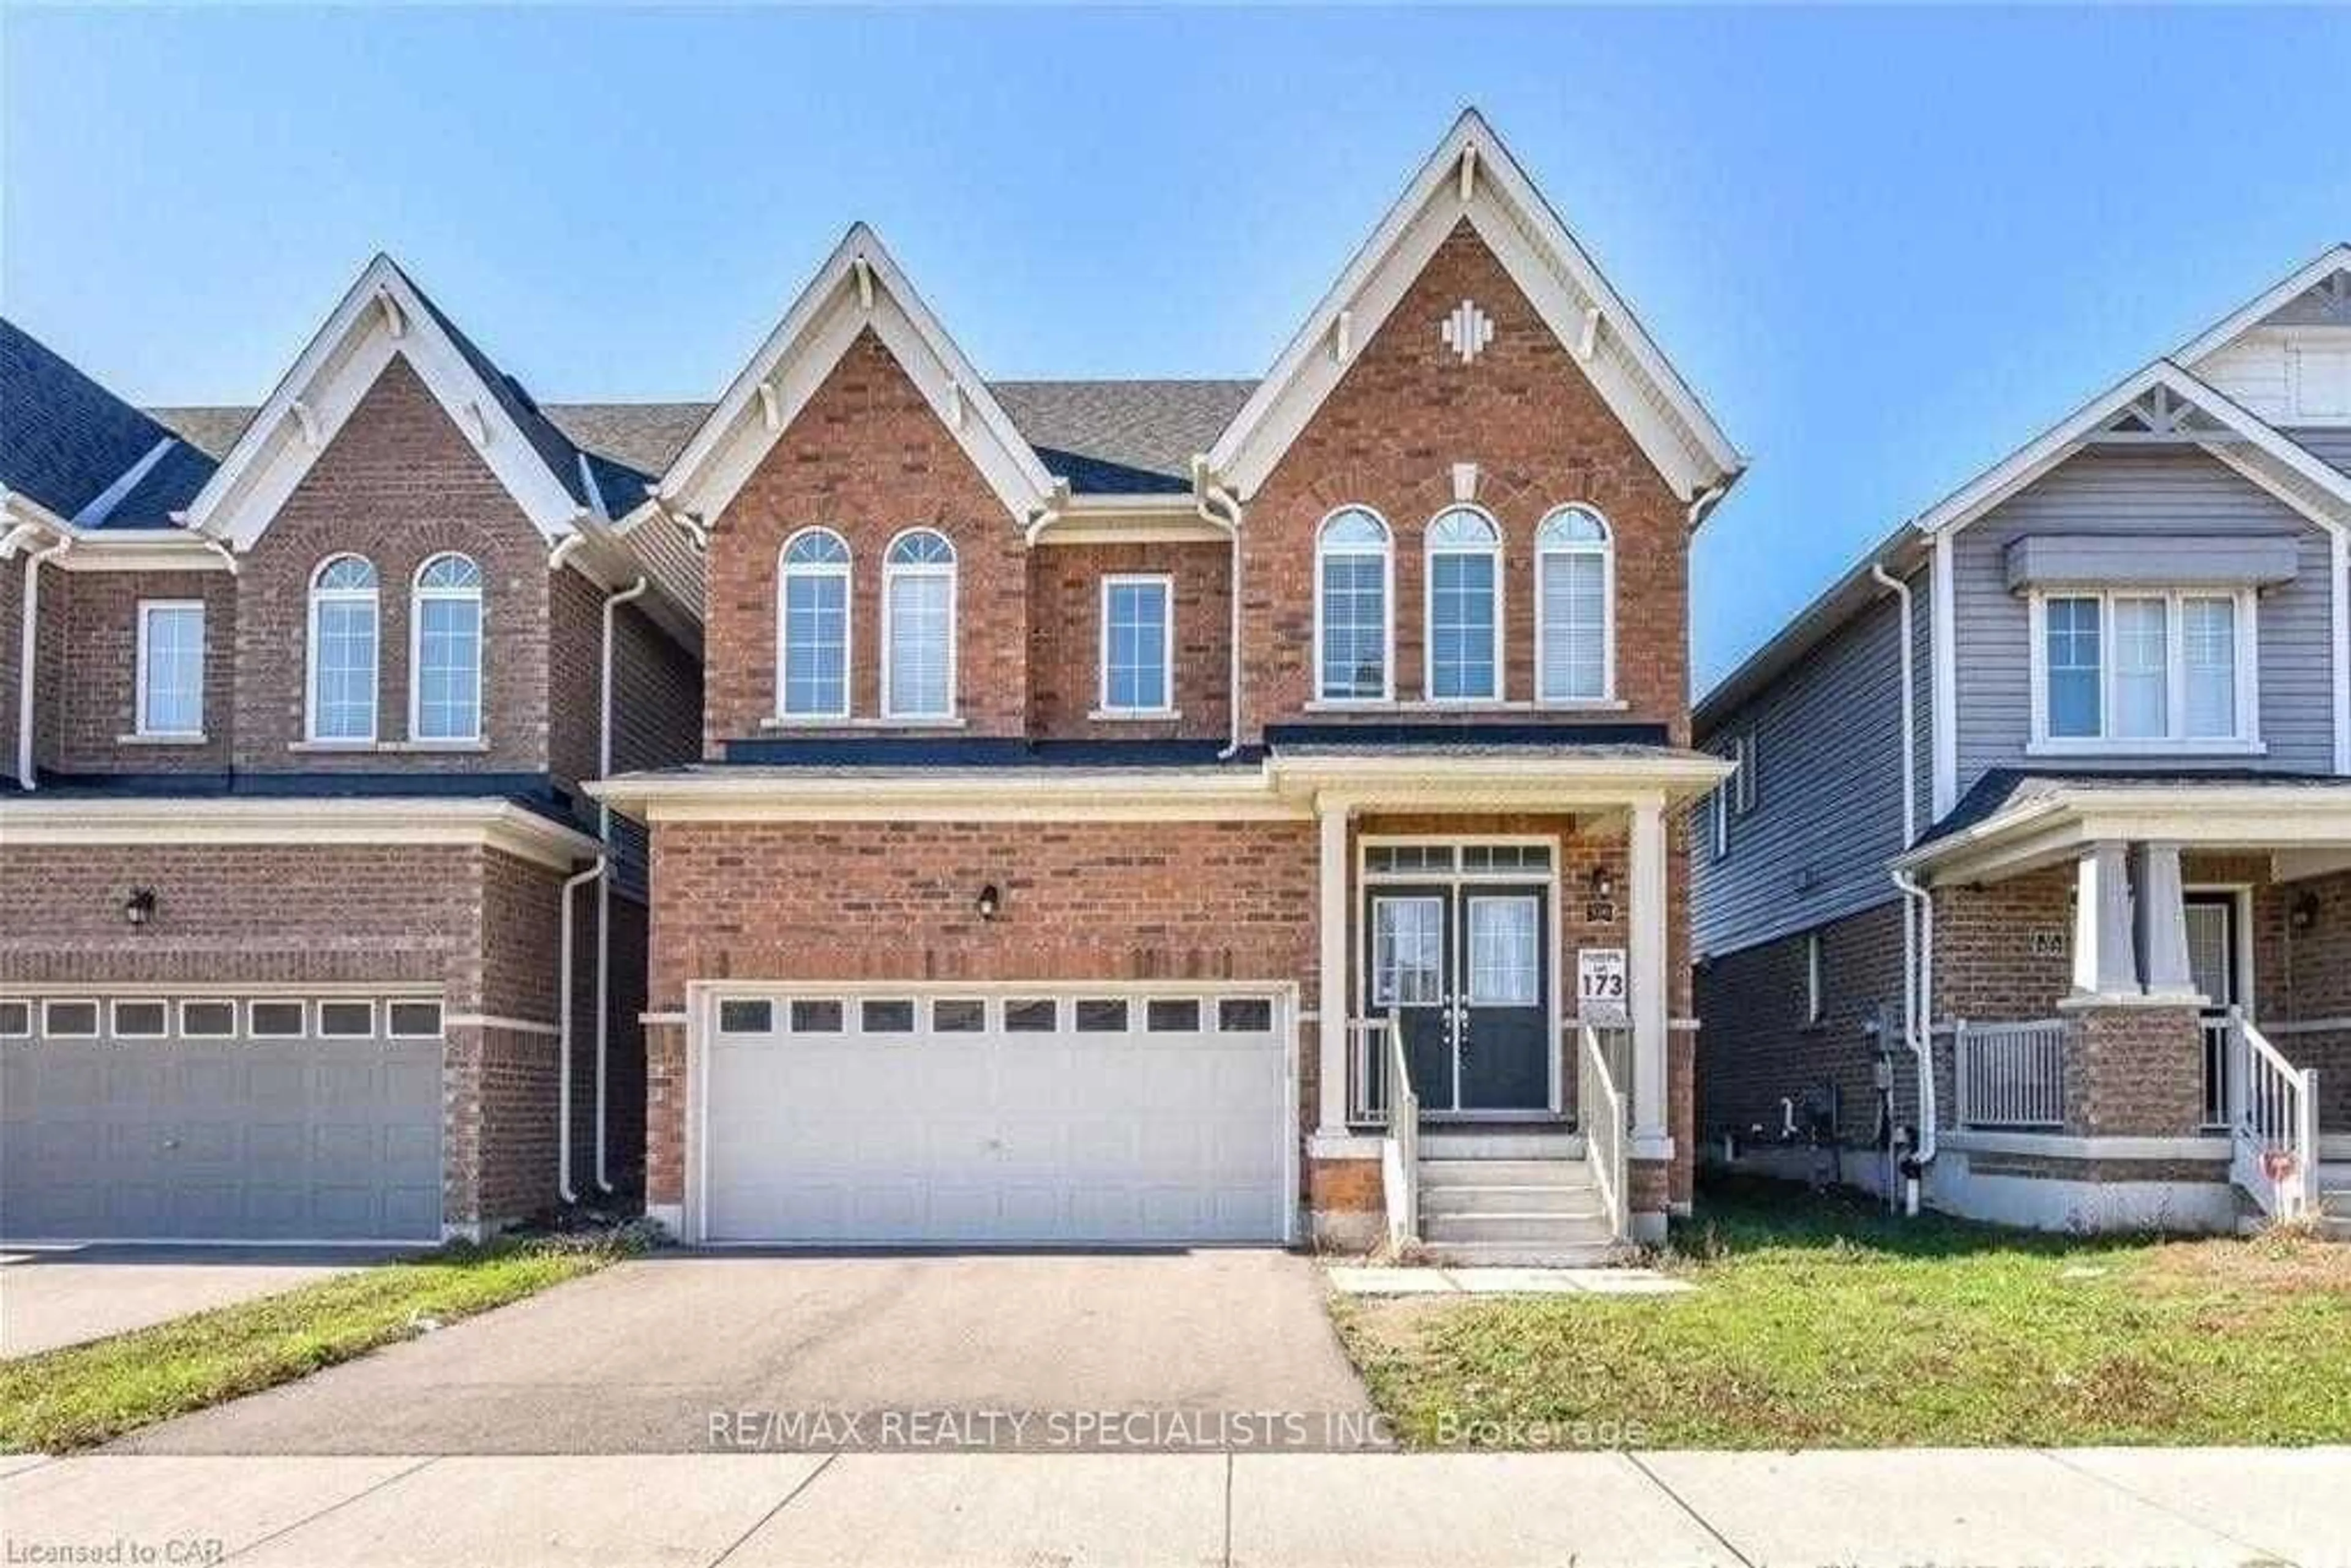 Home with brick exterior material for 516 Linden Dr, Cambridge Ontario N3H 5L5